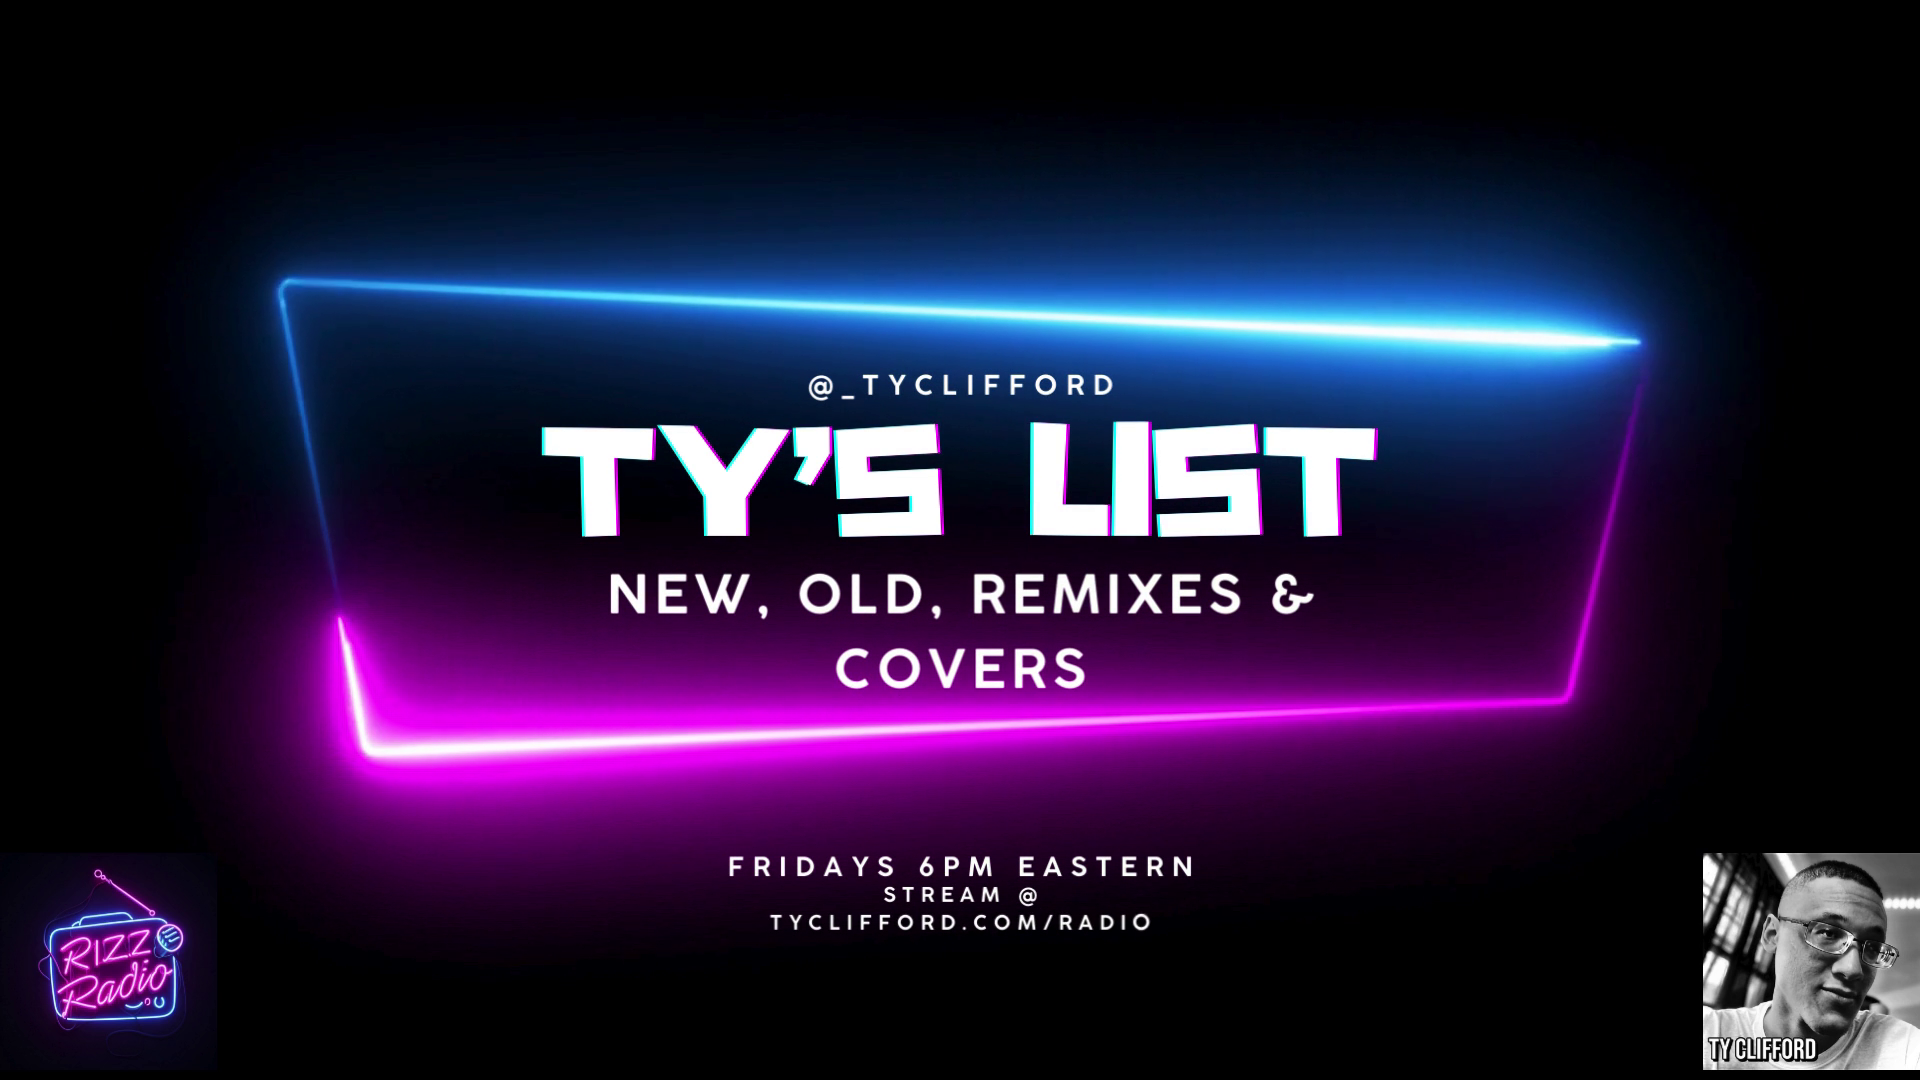 Ty's List Promotion banner. Streamn at 6 PM Eastern